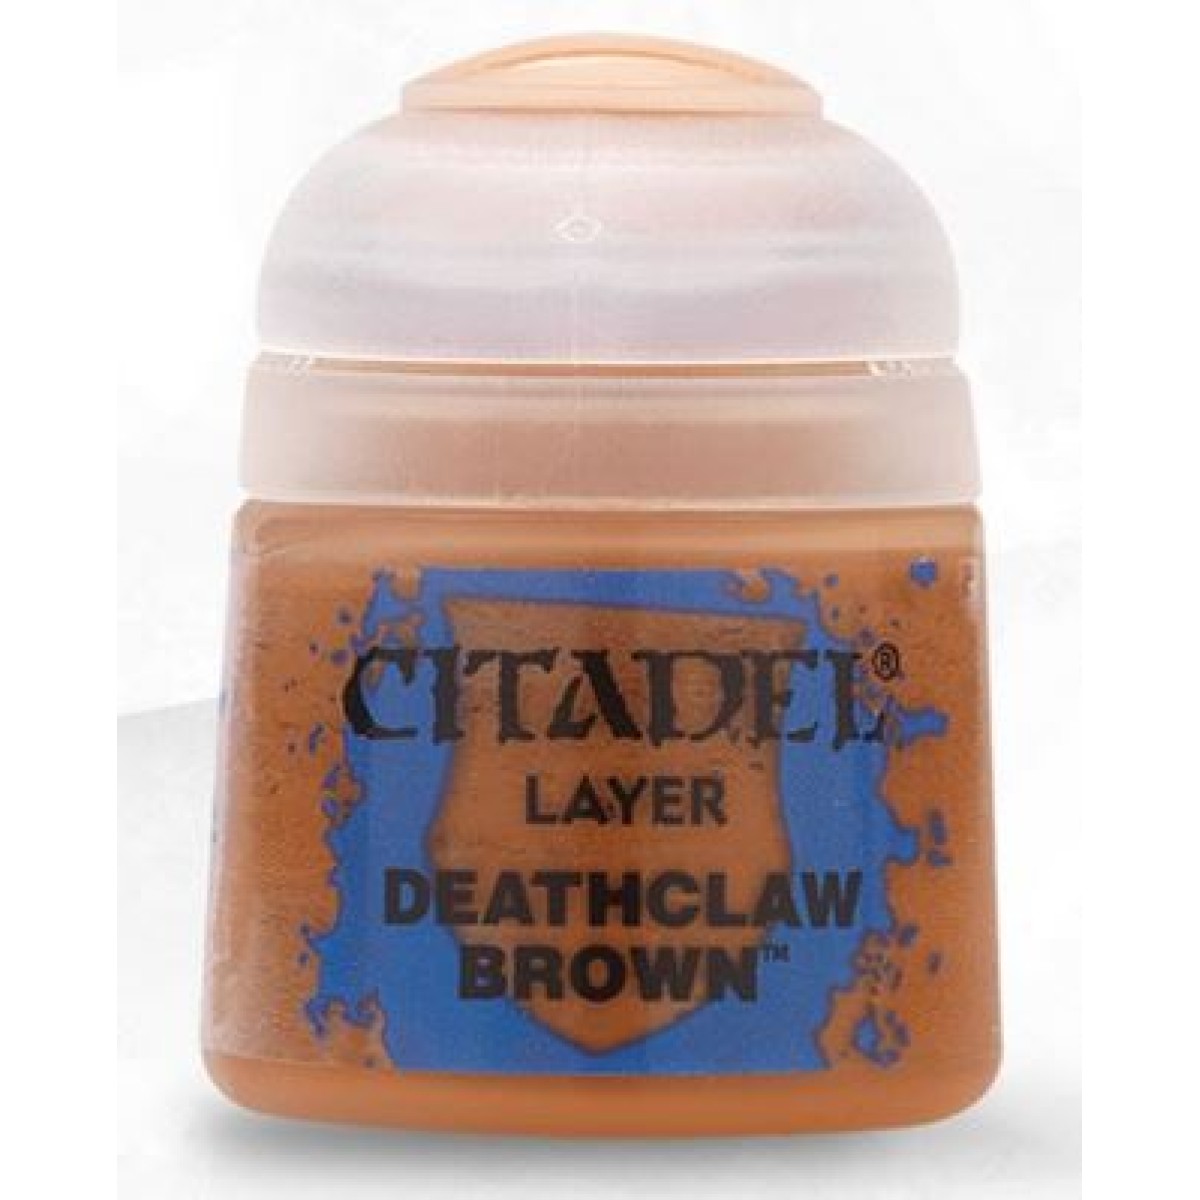 Citadel Layer Paint - Deathclaw Brown